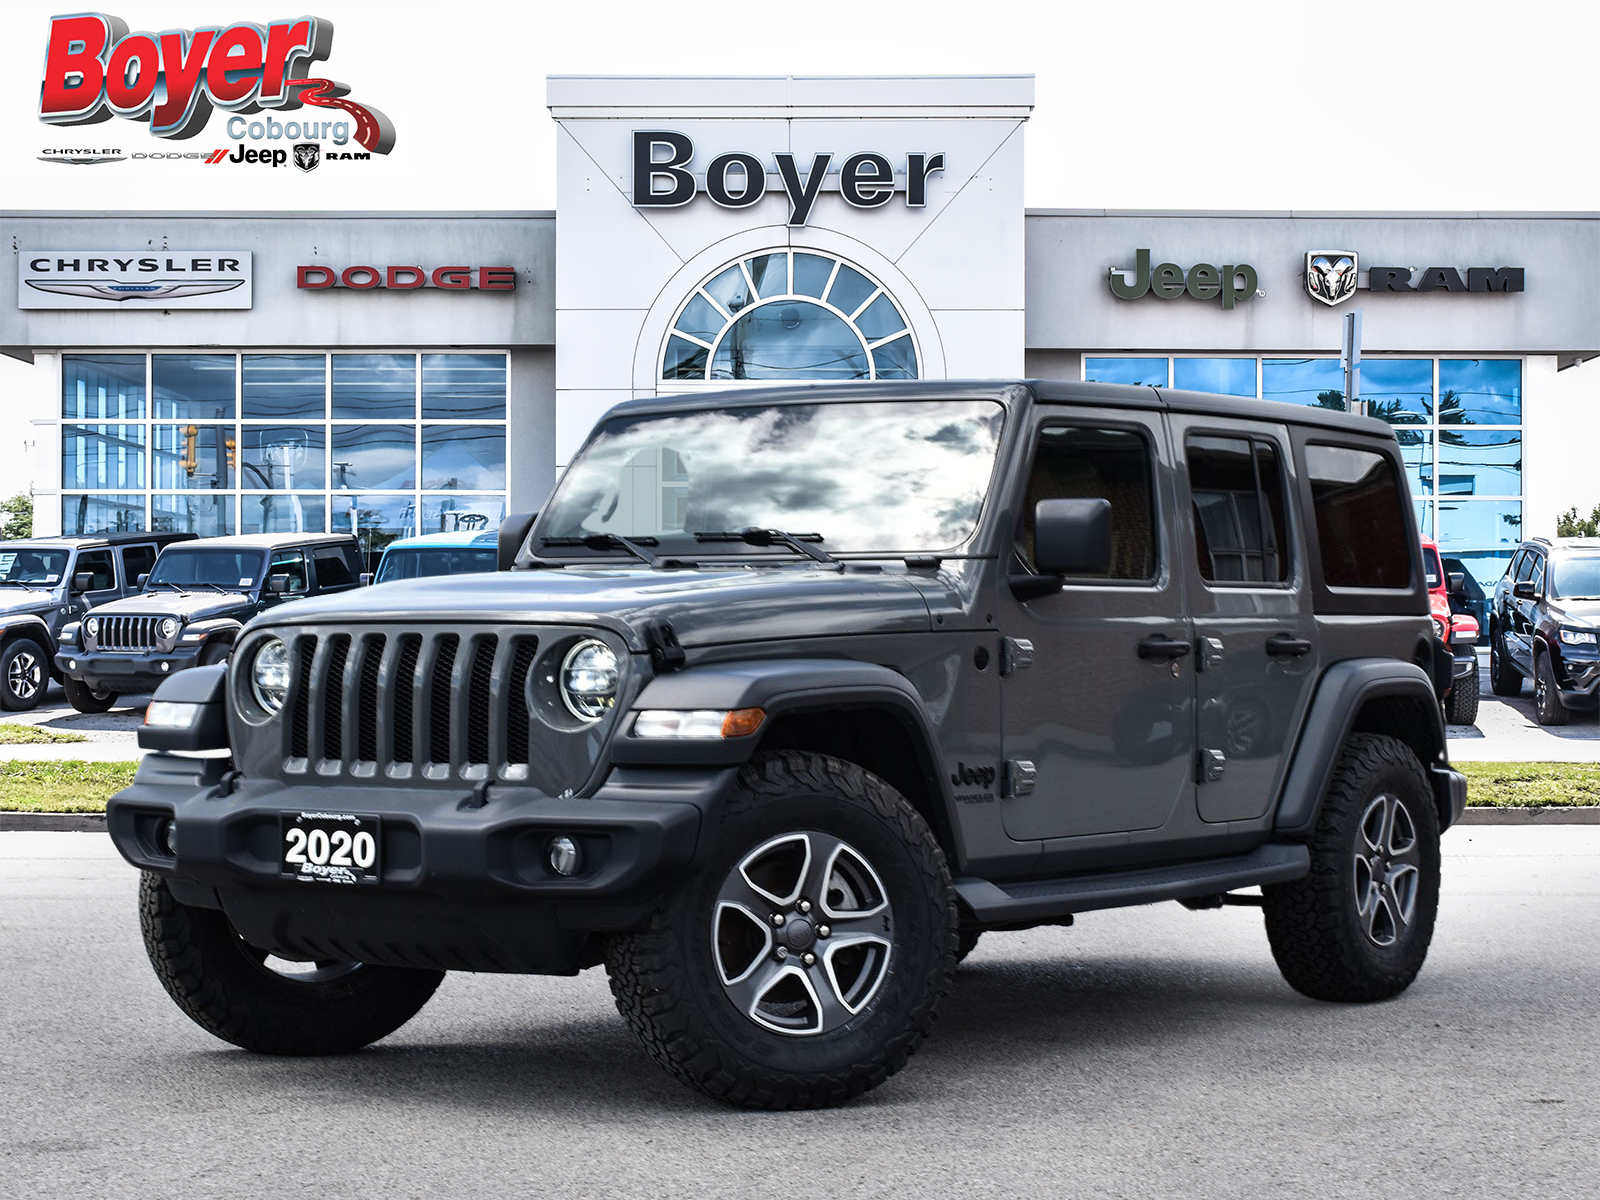 2020 Jeep WRANGLER UNLIMITED BLACK AND TAN EDITION - ONE OWNER - HARD TOP 